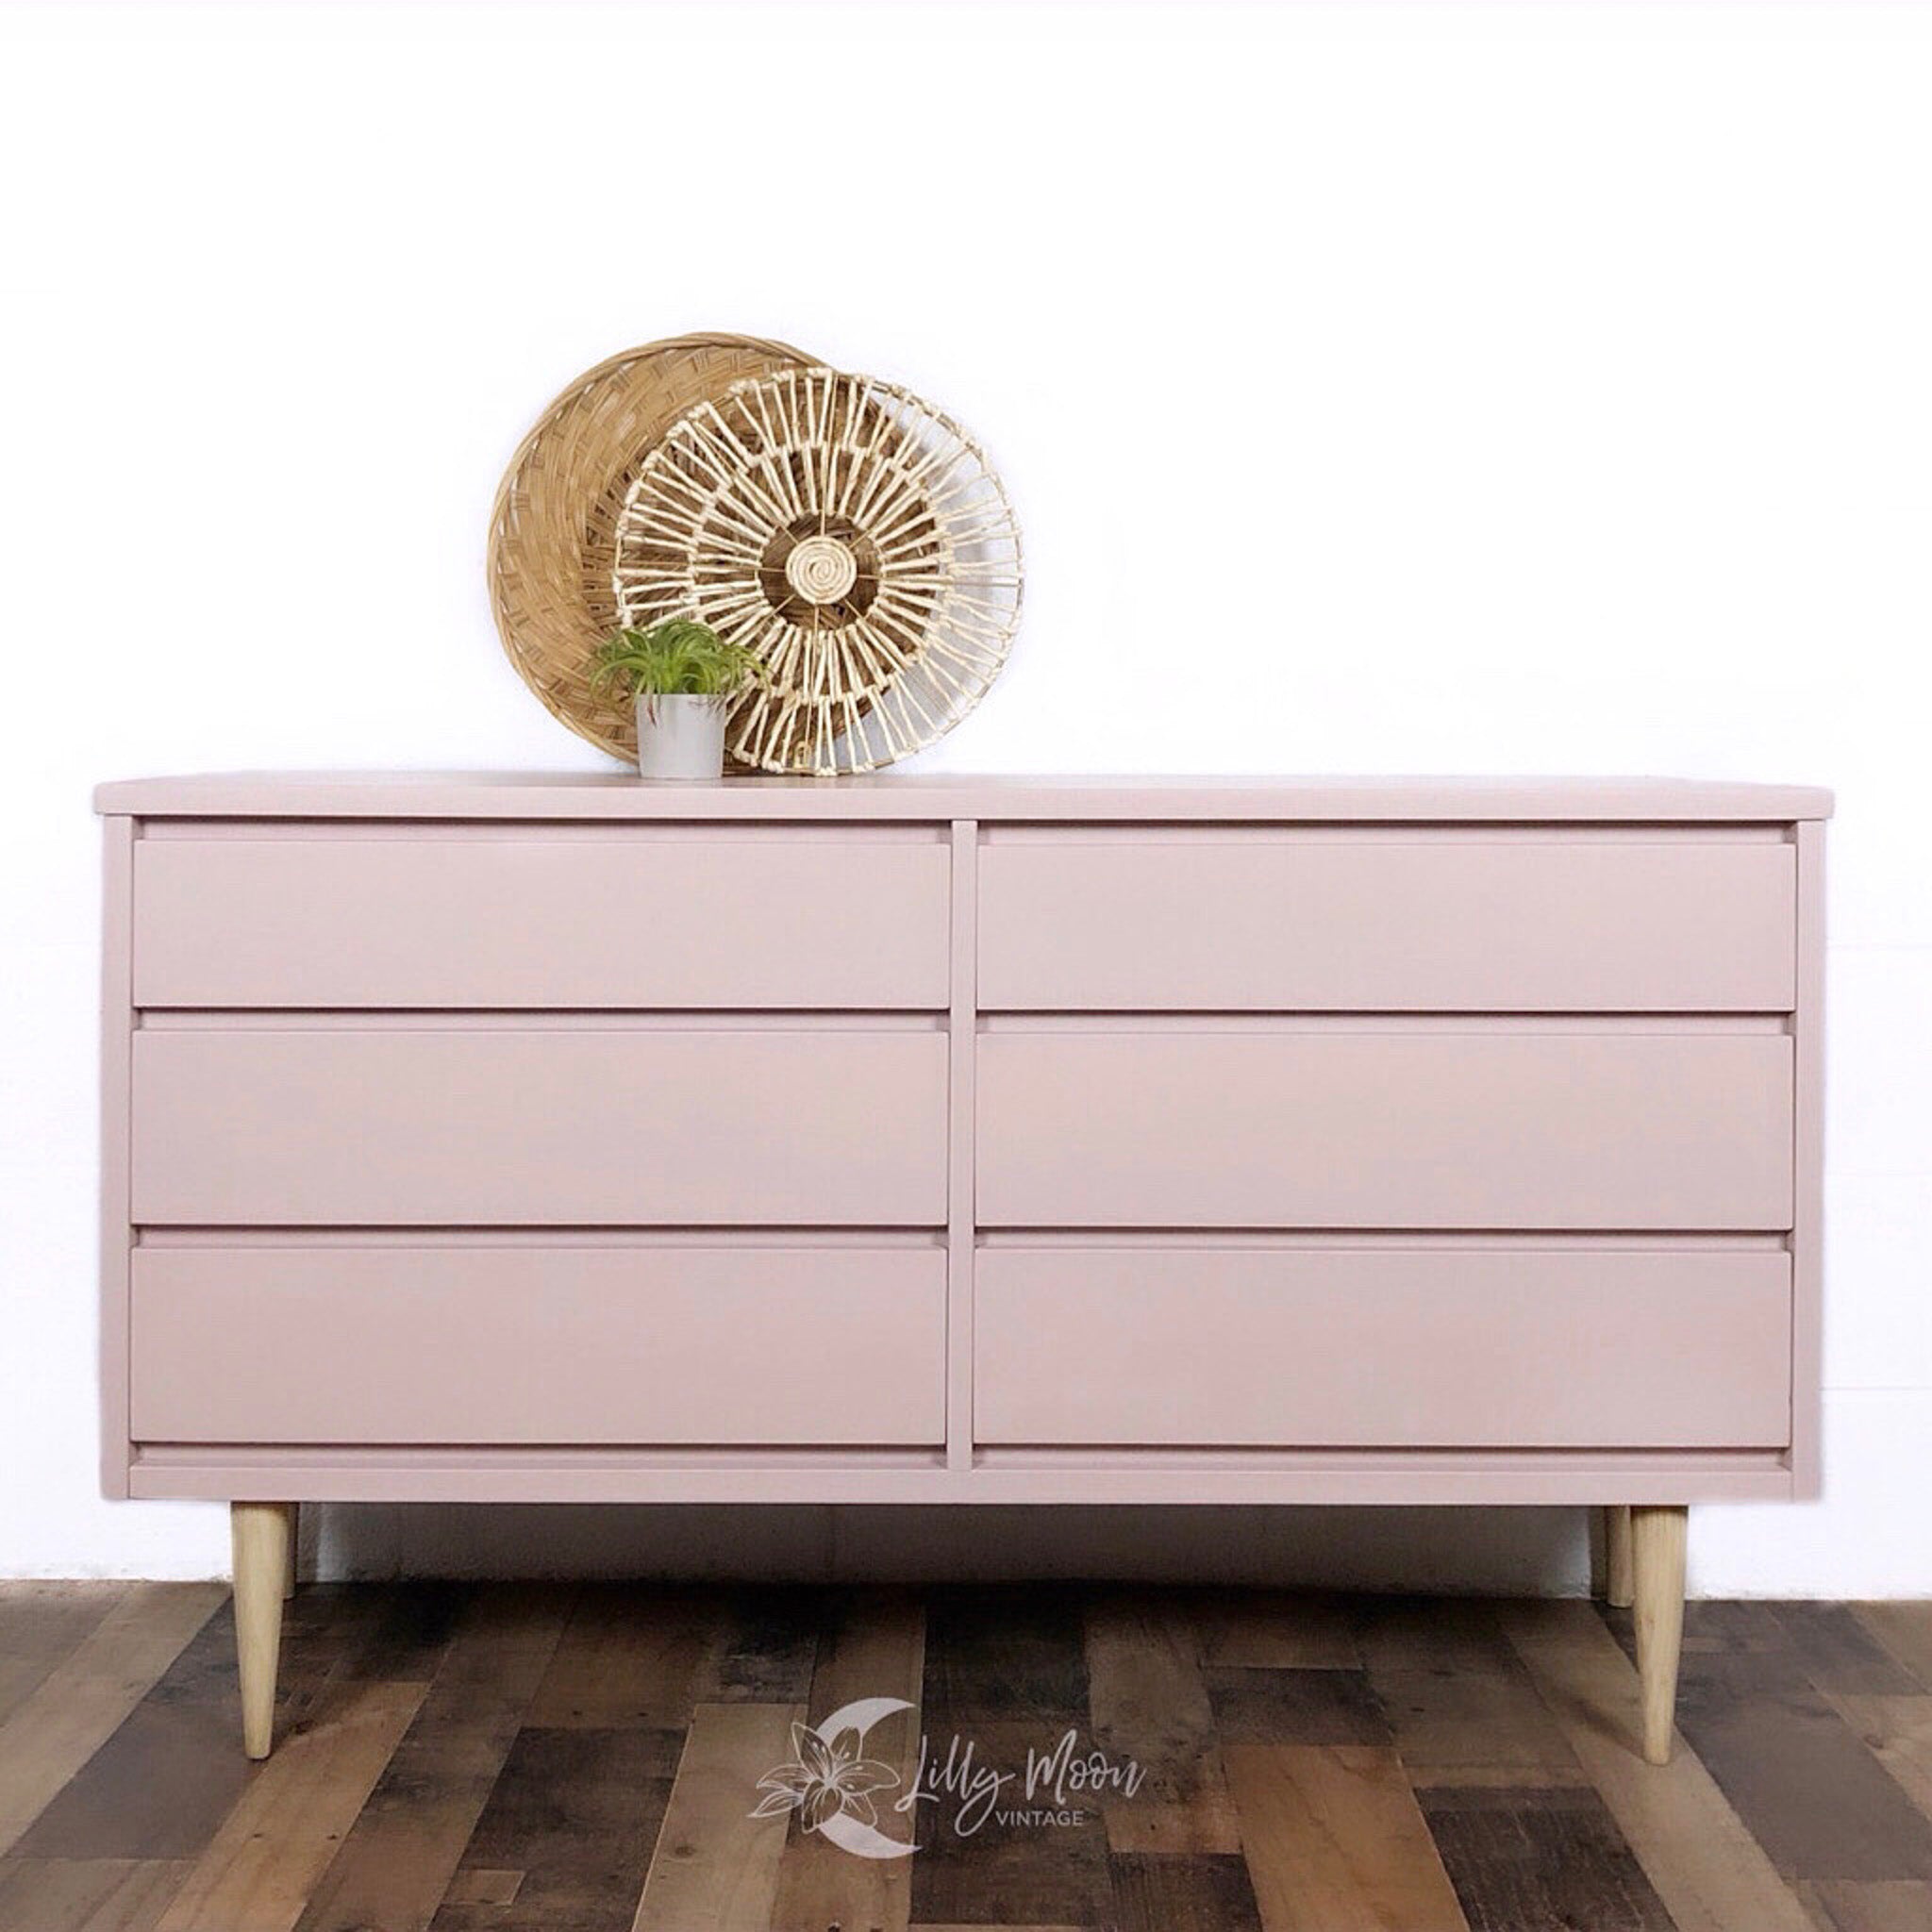 A mid-century 6-drawer dresser refurbished by Lilly Moon Vintage is painted in Dixie Belle's Tea Rose chalk mineral paint.